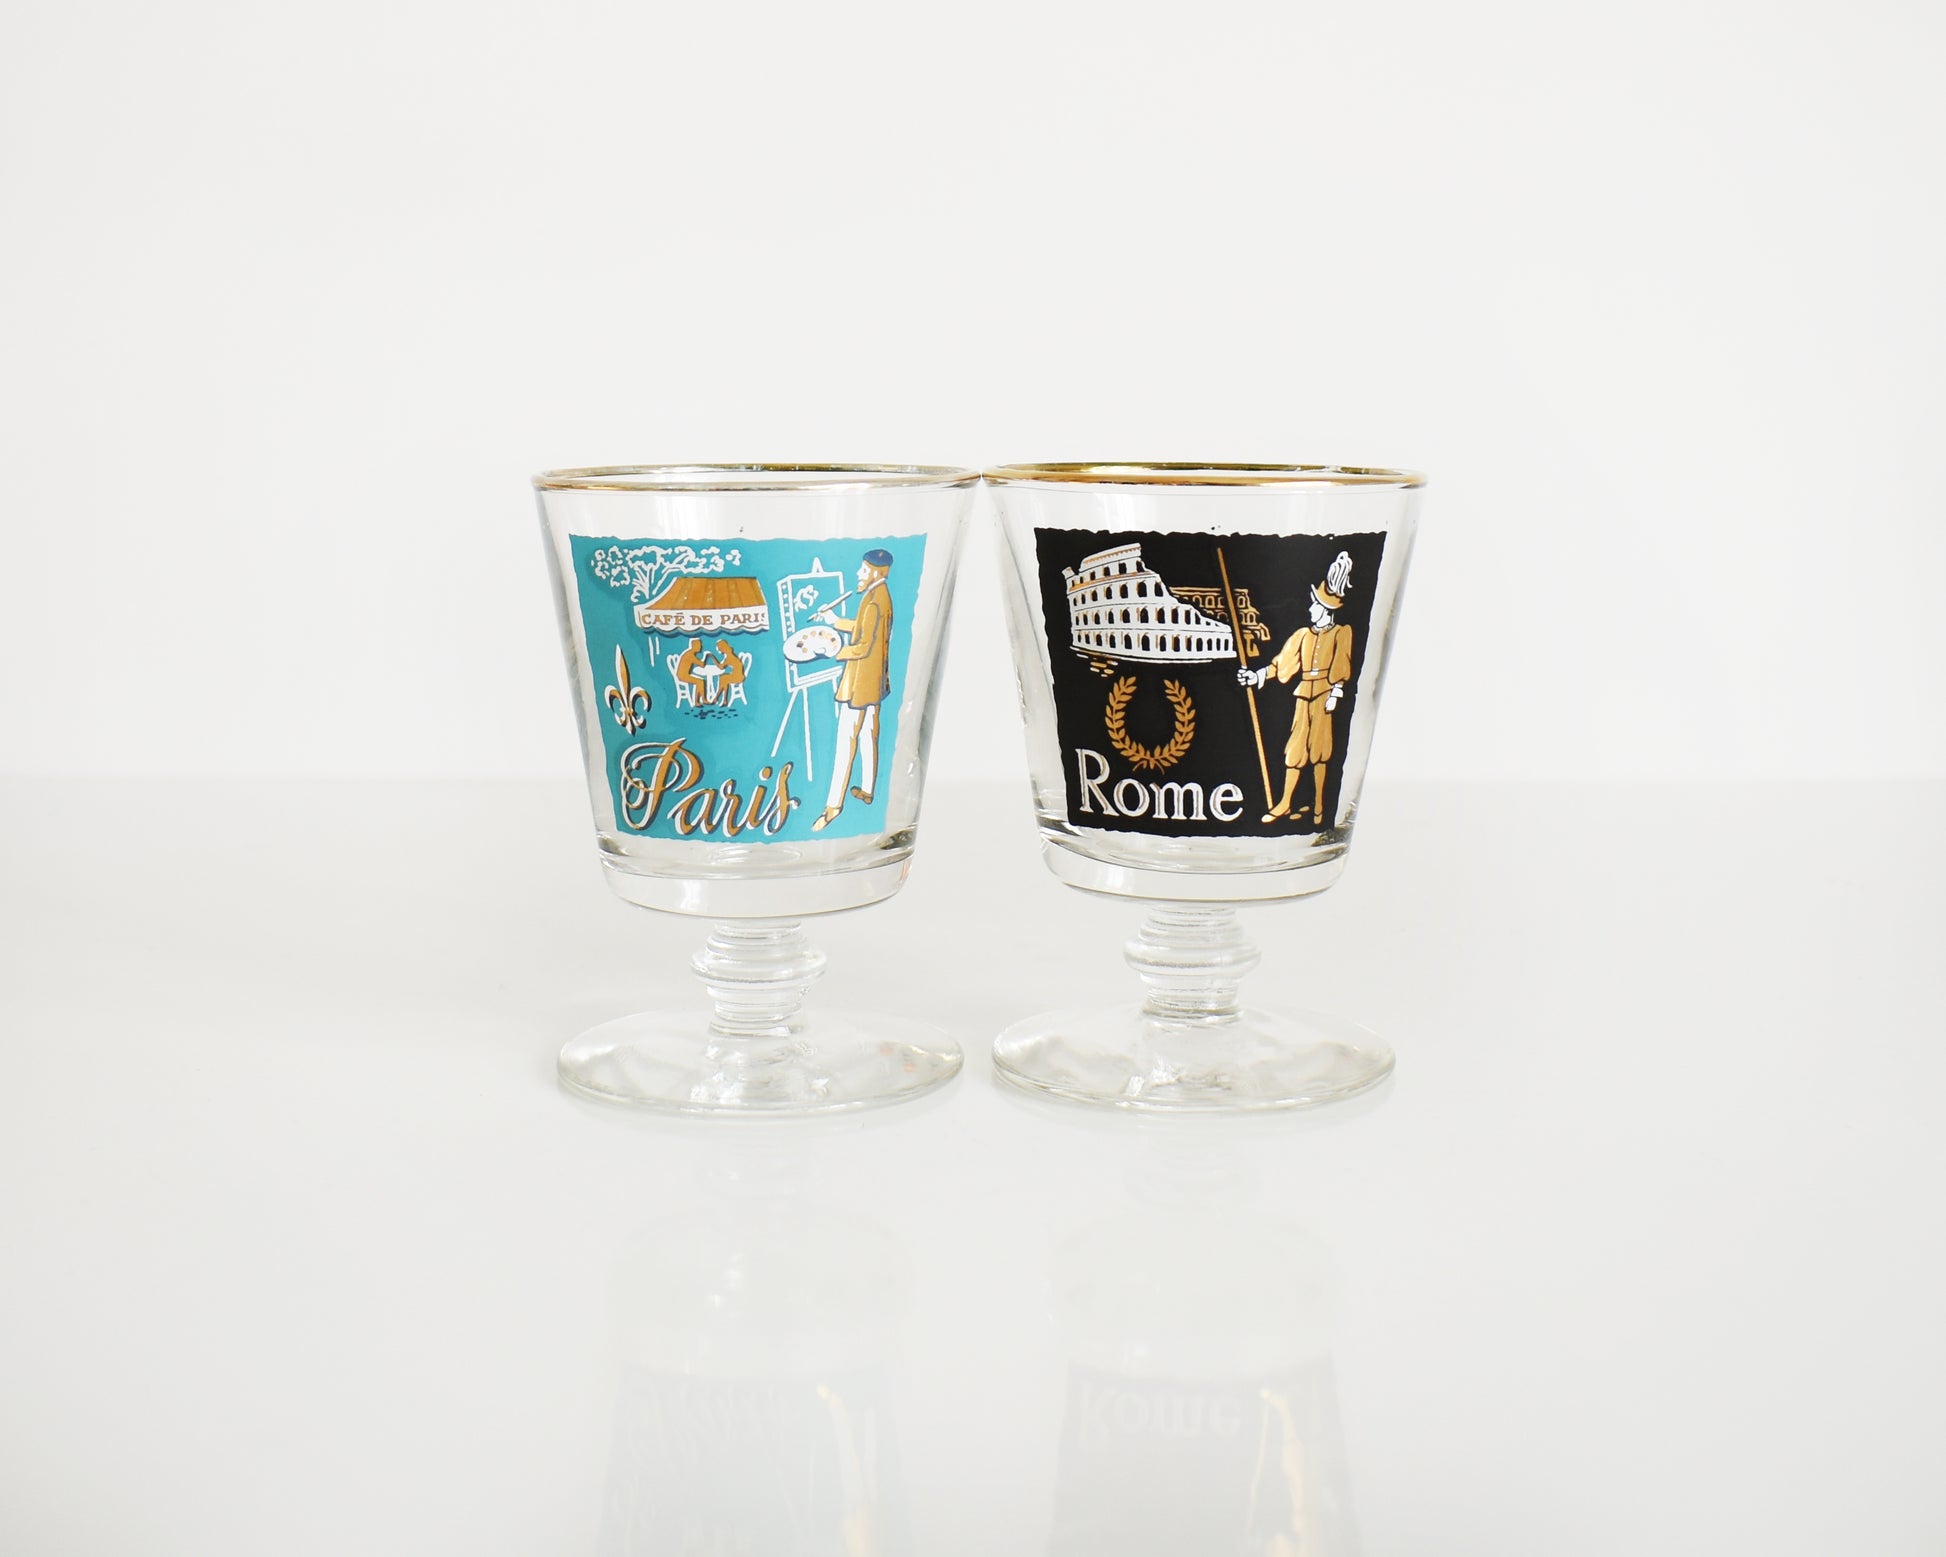 The Paris and Rome glasses